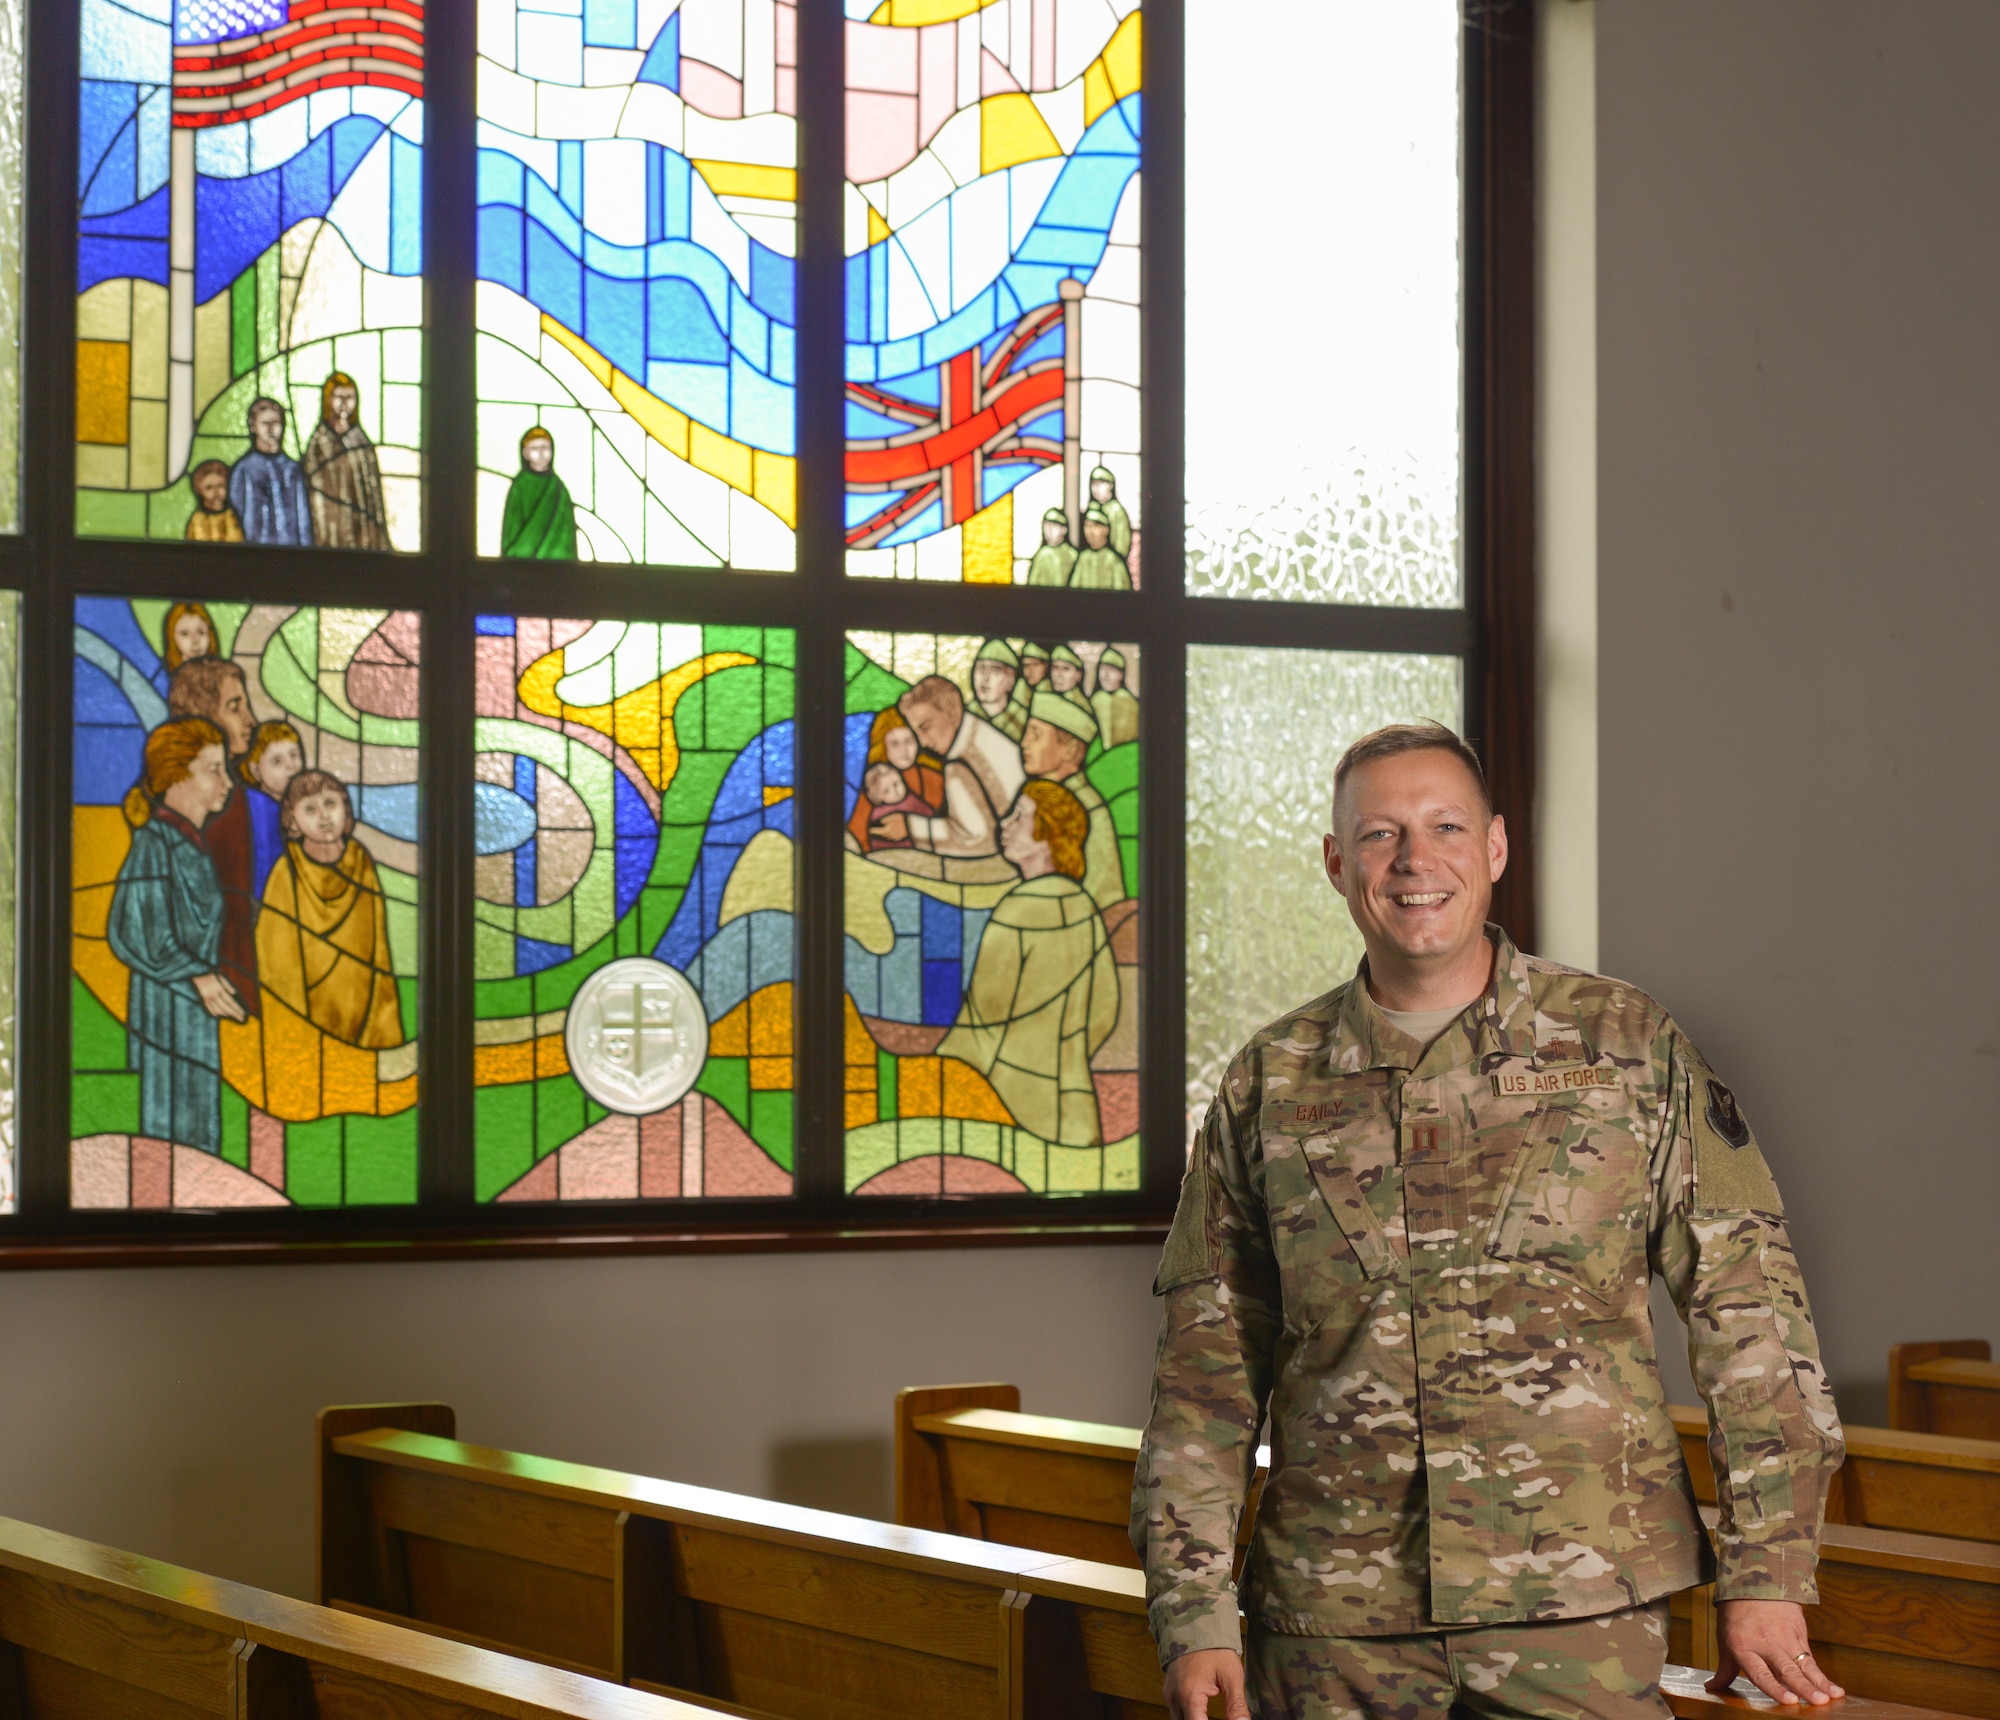 Captain Graham Baily, Chaplain assigned to the 509th Bomb Wing, stands in the chapel at Royal Air Force Fairford, England. Baily was deployed with members of the 509th Bomb Wing for the Bomber Task Force mission. His role in the mission is to provide for and accommodate Airmen’s First Amendment right to freely exercise their religion. Baily also provides pastoral care which includes privileged counseling, worship services, and morale trips for the Airmen on this deployment.